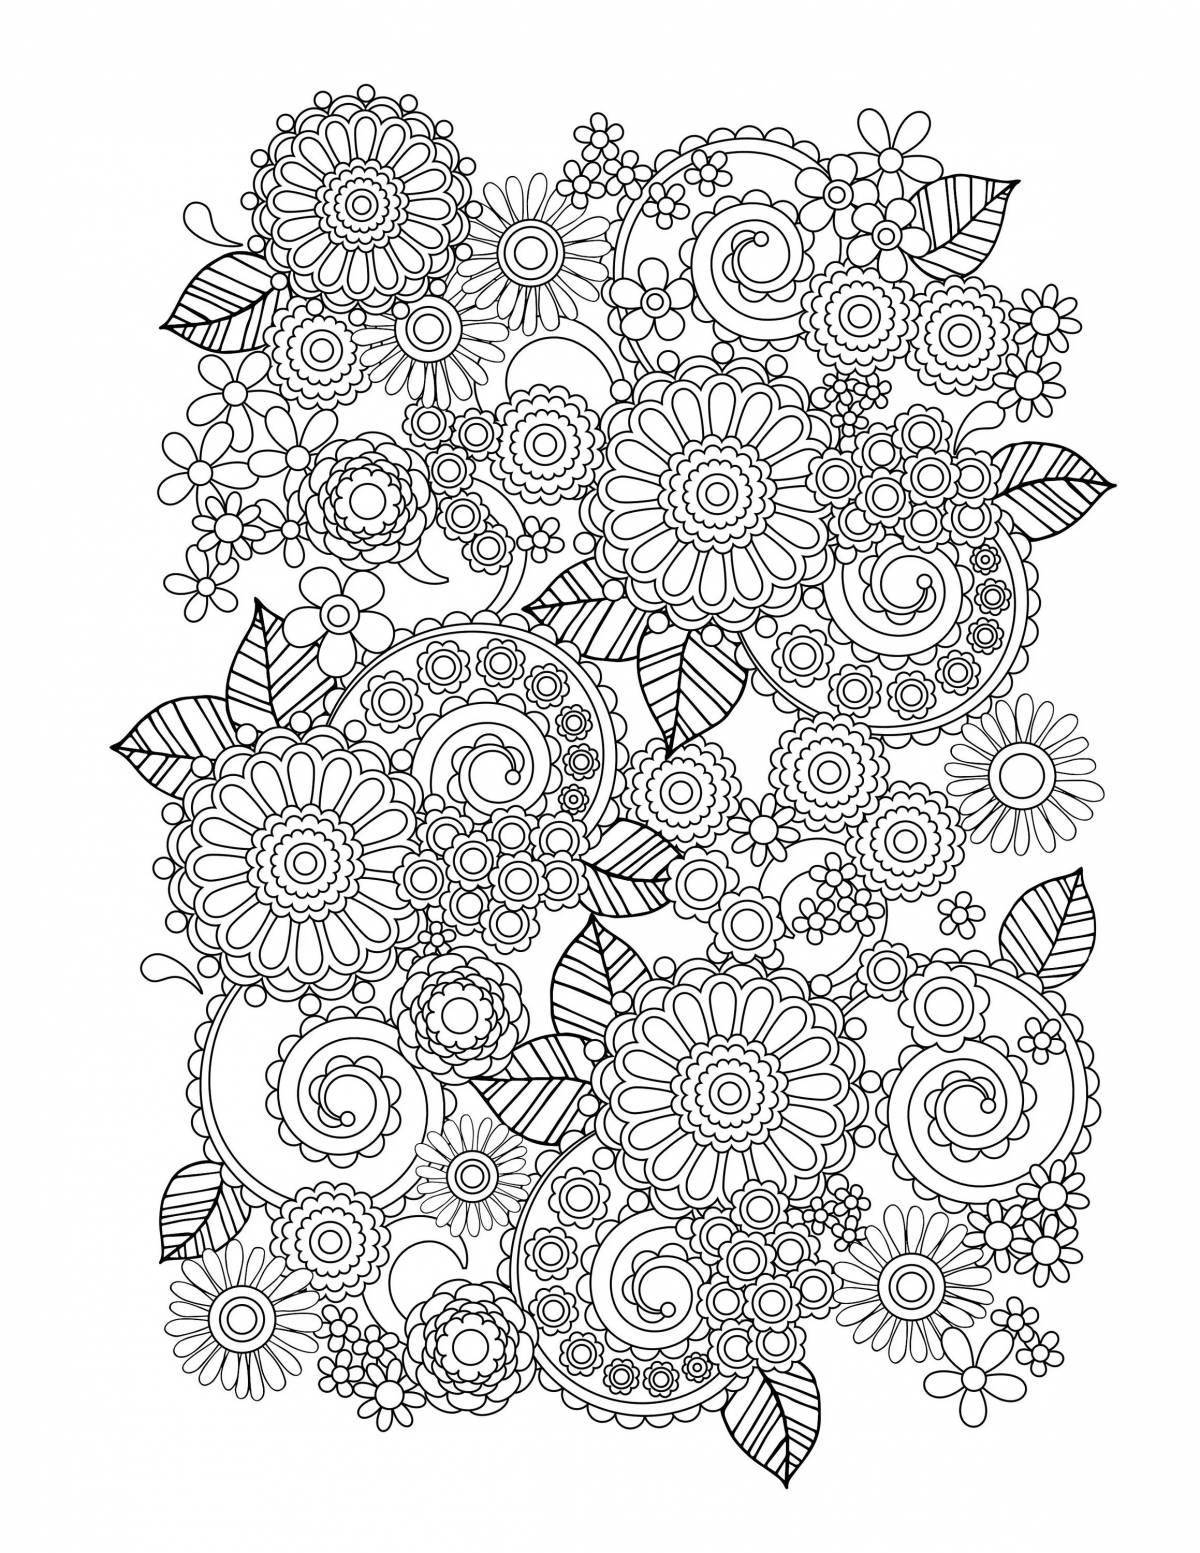 Refreshing coloring book relax antistress for adults